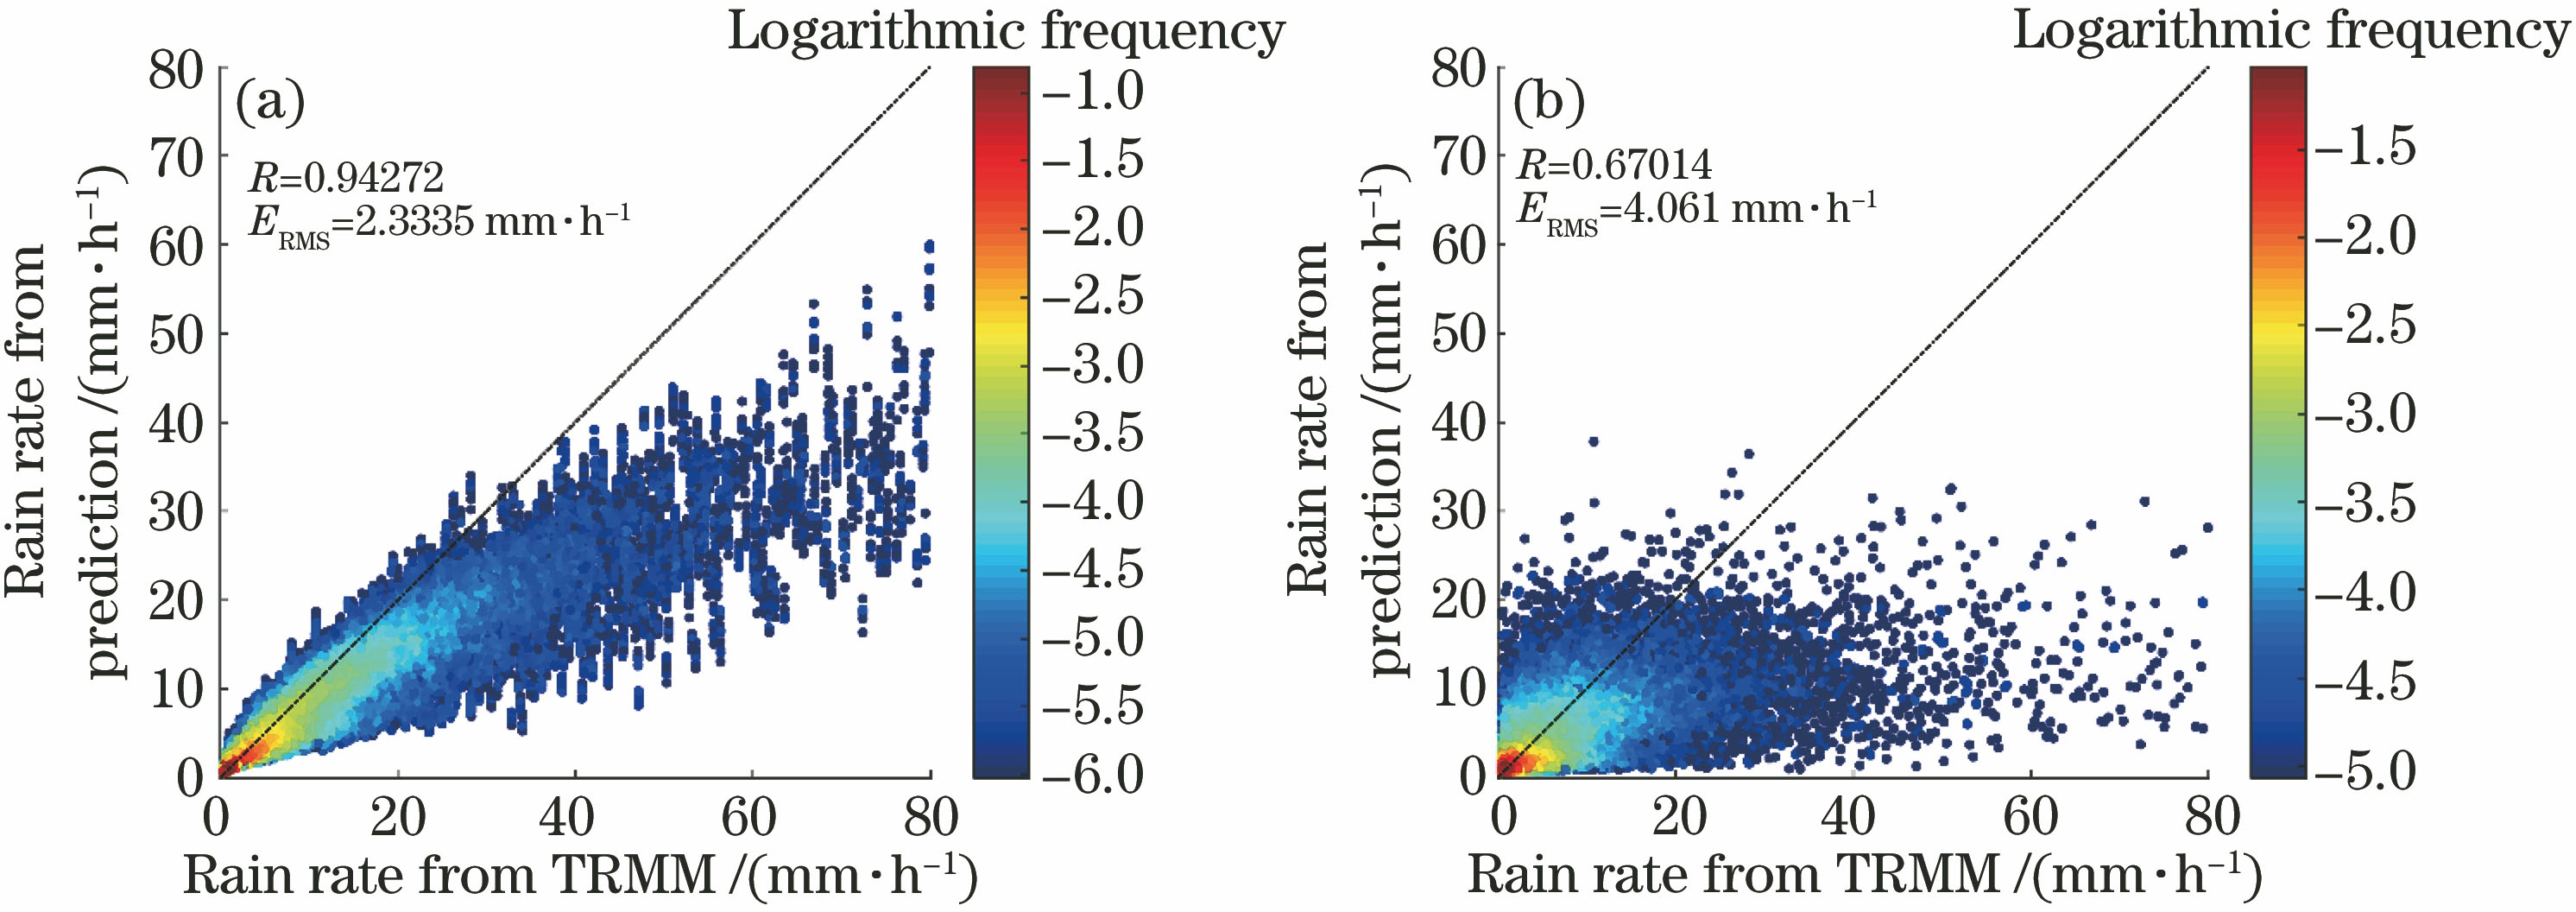 Scatter of predicted rain rate of random forest model and observed rain rate for training set and testing set. (a) Training set; (b) testing set